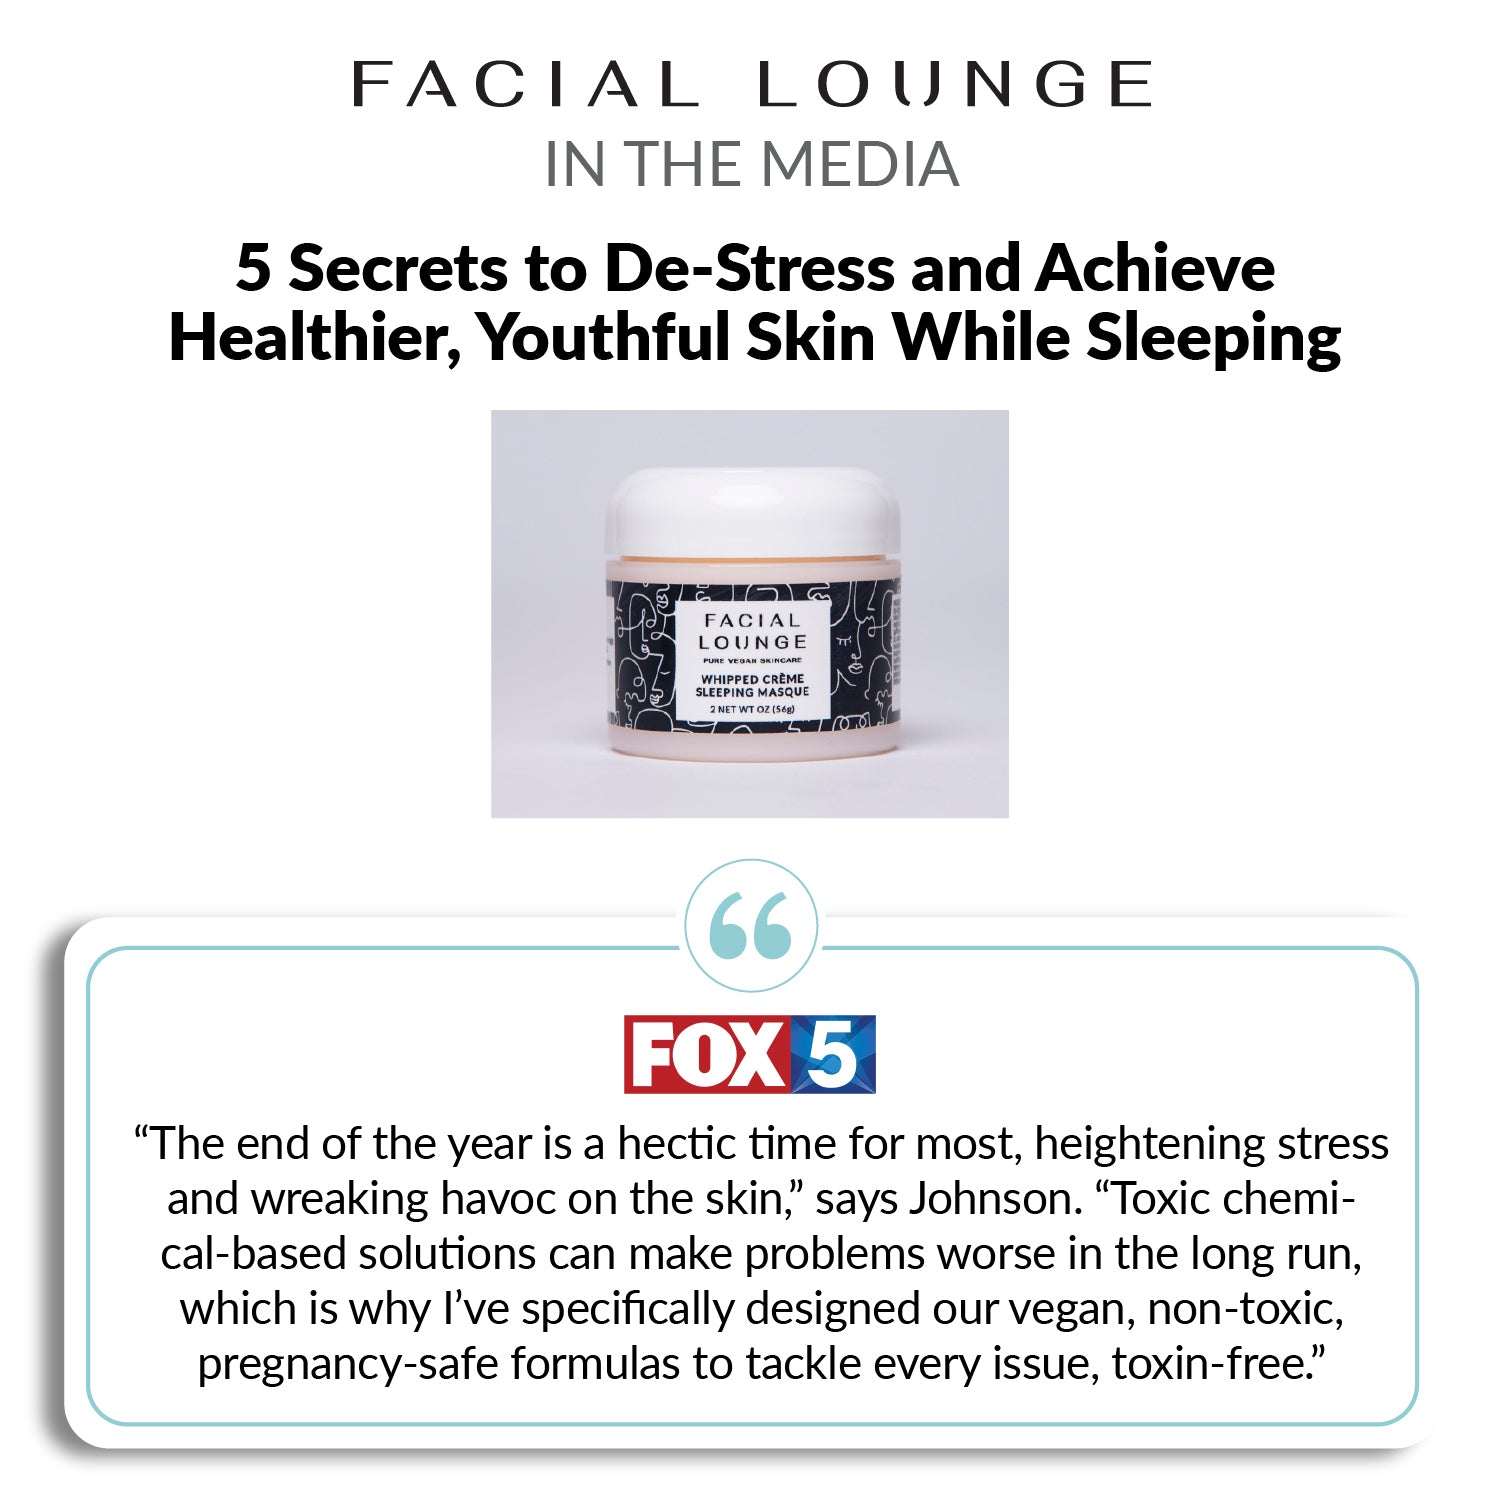 Featured in Fox 5: 5 Secrets to De-Stress and Achieve Healthier, Youthful Skin While Sleeping